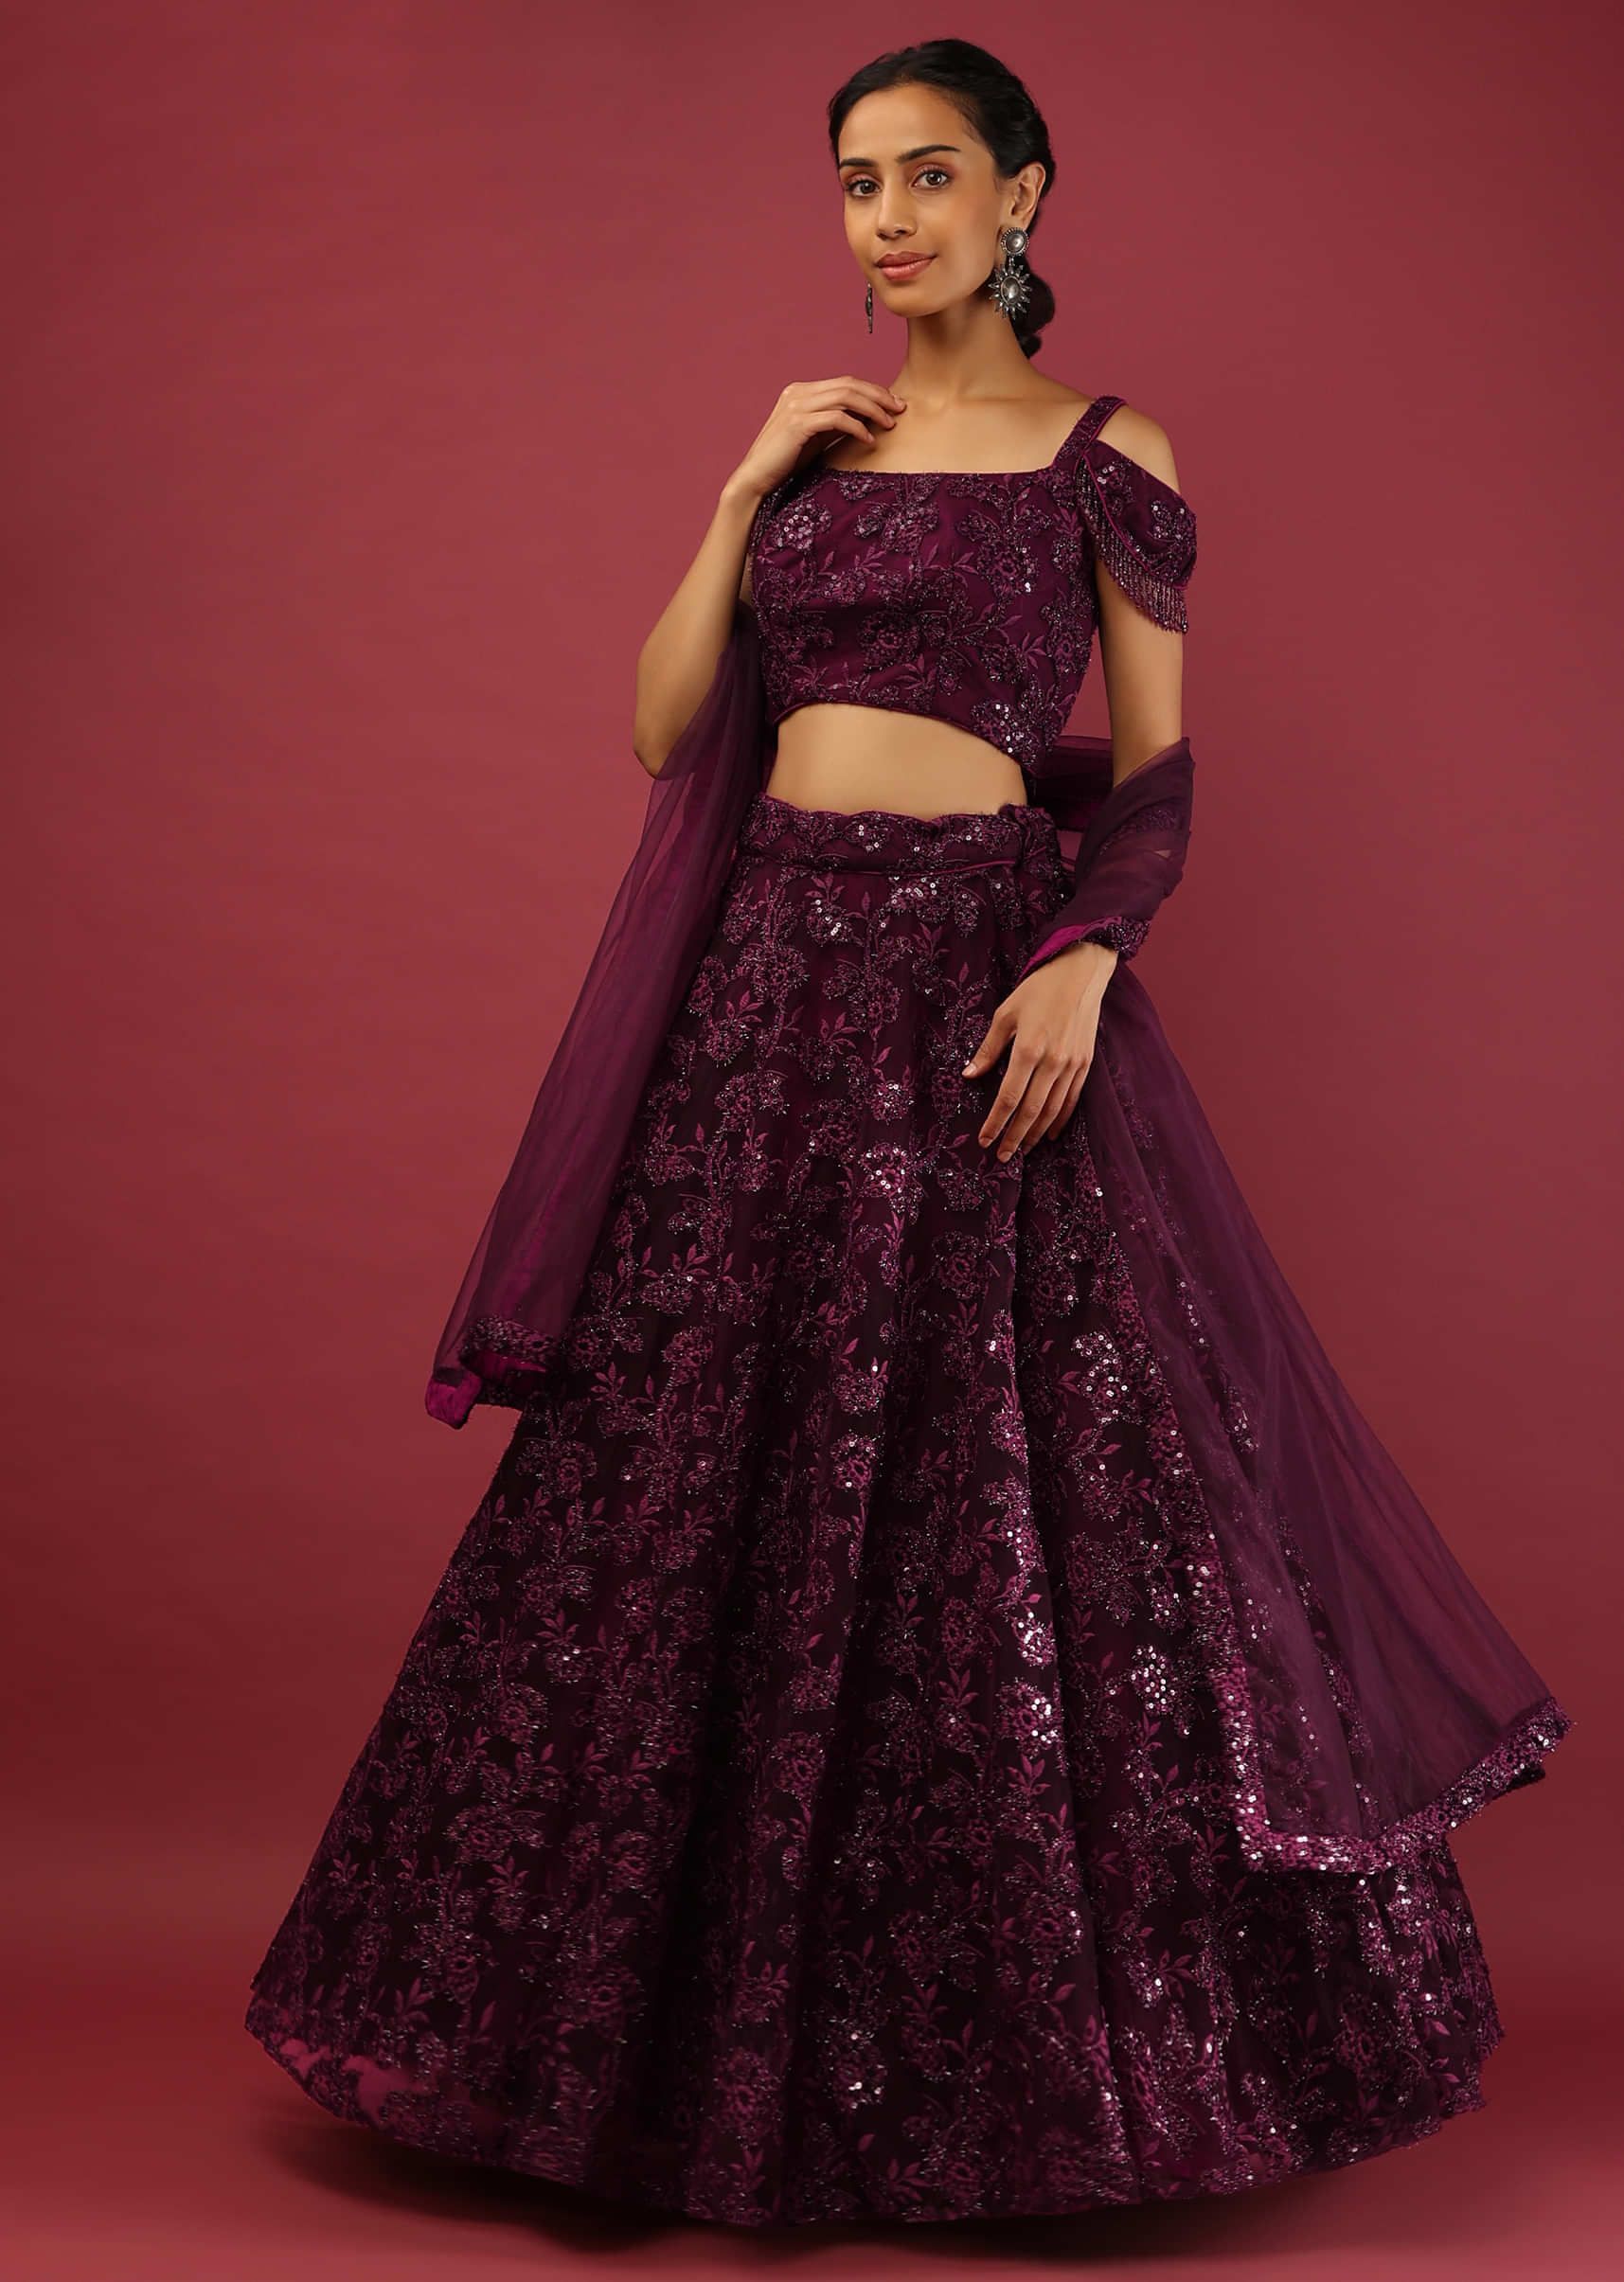 Wine Lehenga Choli In Embroidered Net With Bead Fringes On The Cold Shoulder Sleeves 